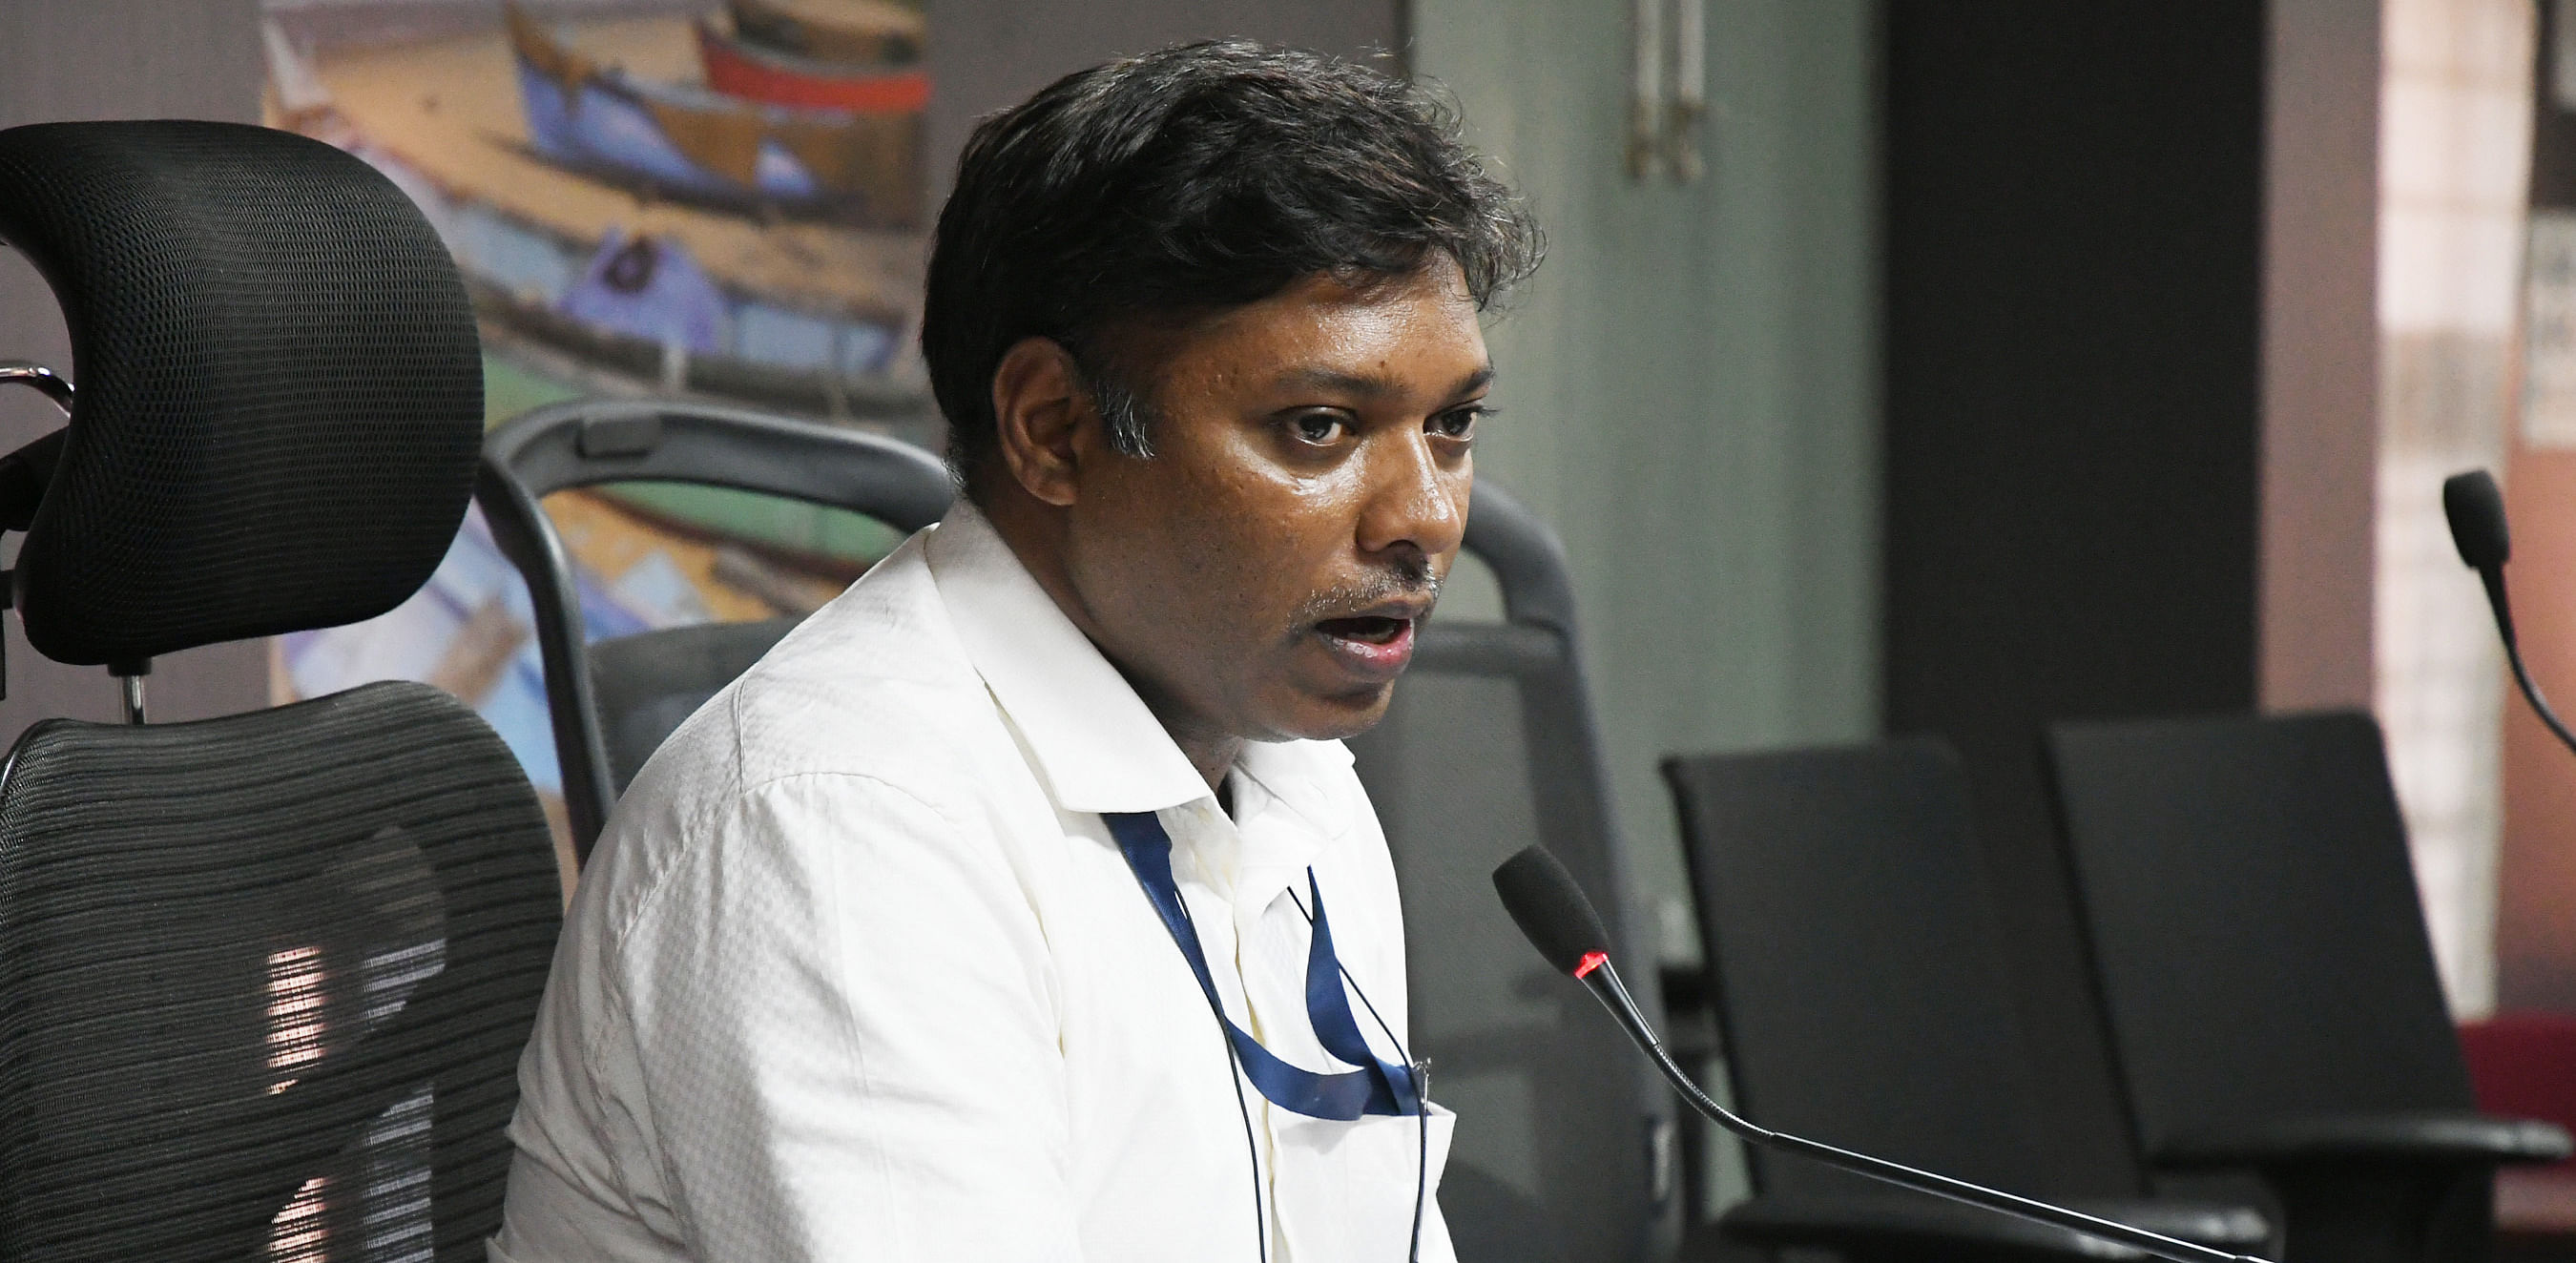 After resigning from civil services, Senthil has criticised the BJP-led Centre on a slew of issues. He tore into the Narendra Modi government on the Citizenship (Amendment) Act and campaigned against it in several parts of the country. Credit: DH File Photo